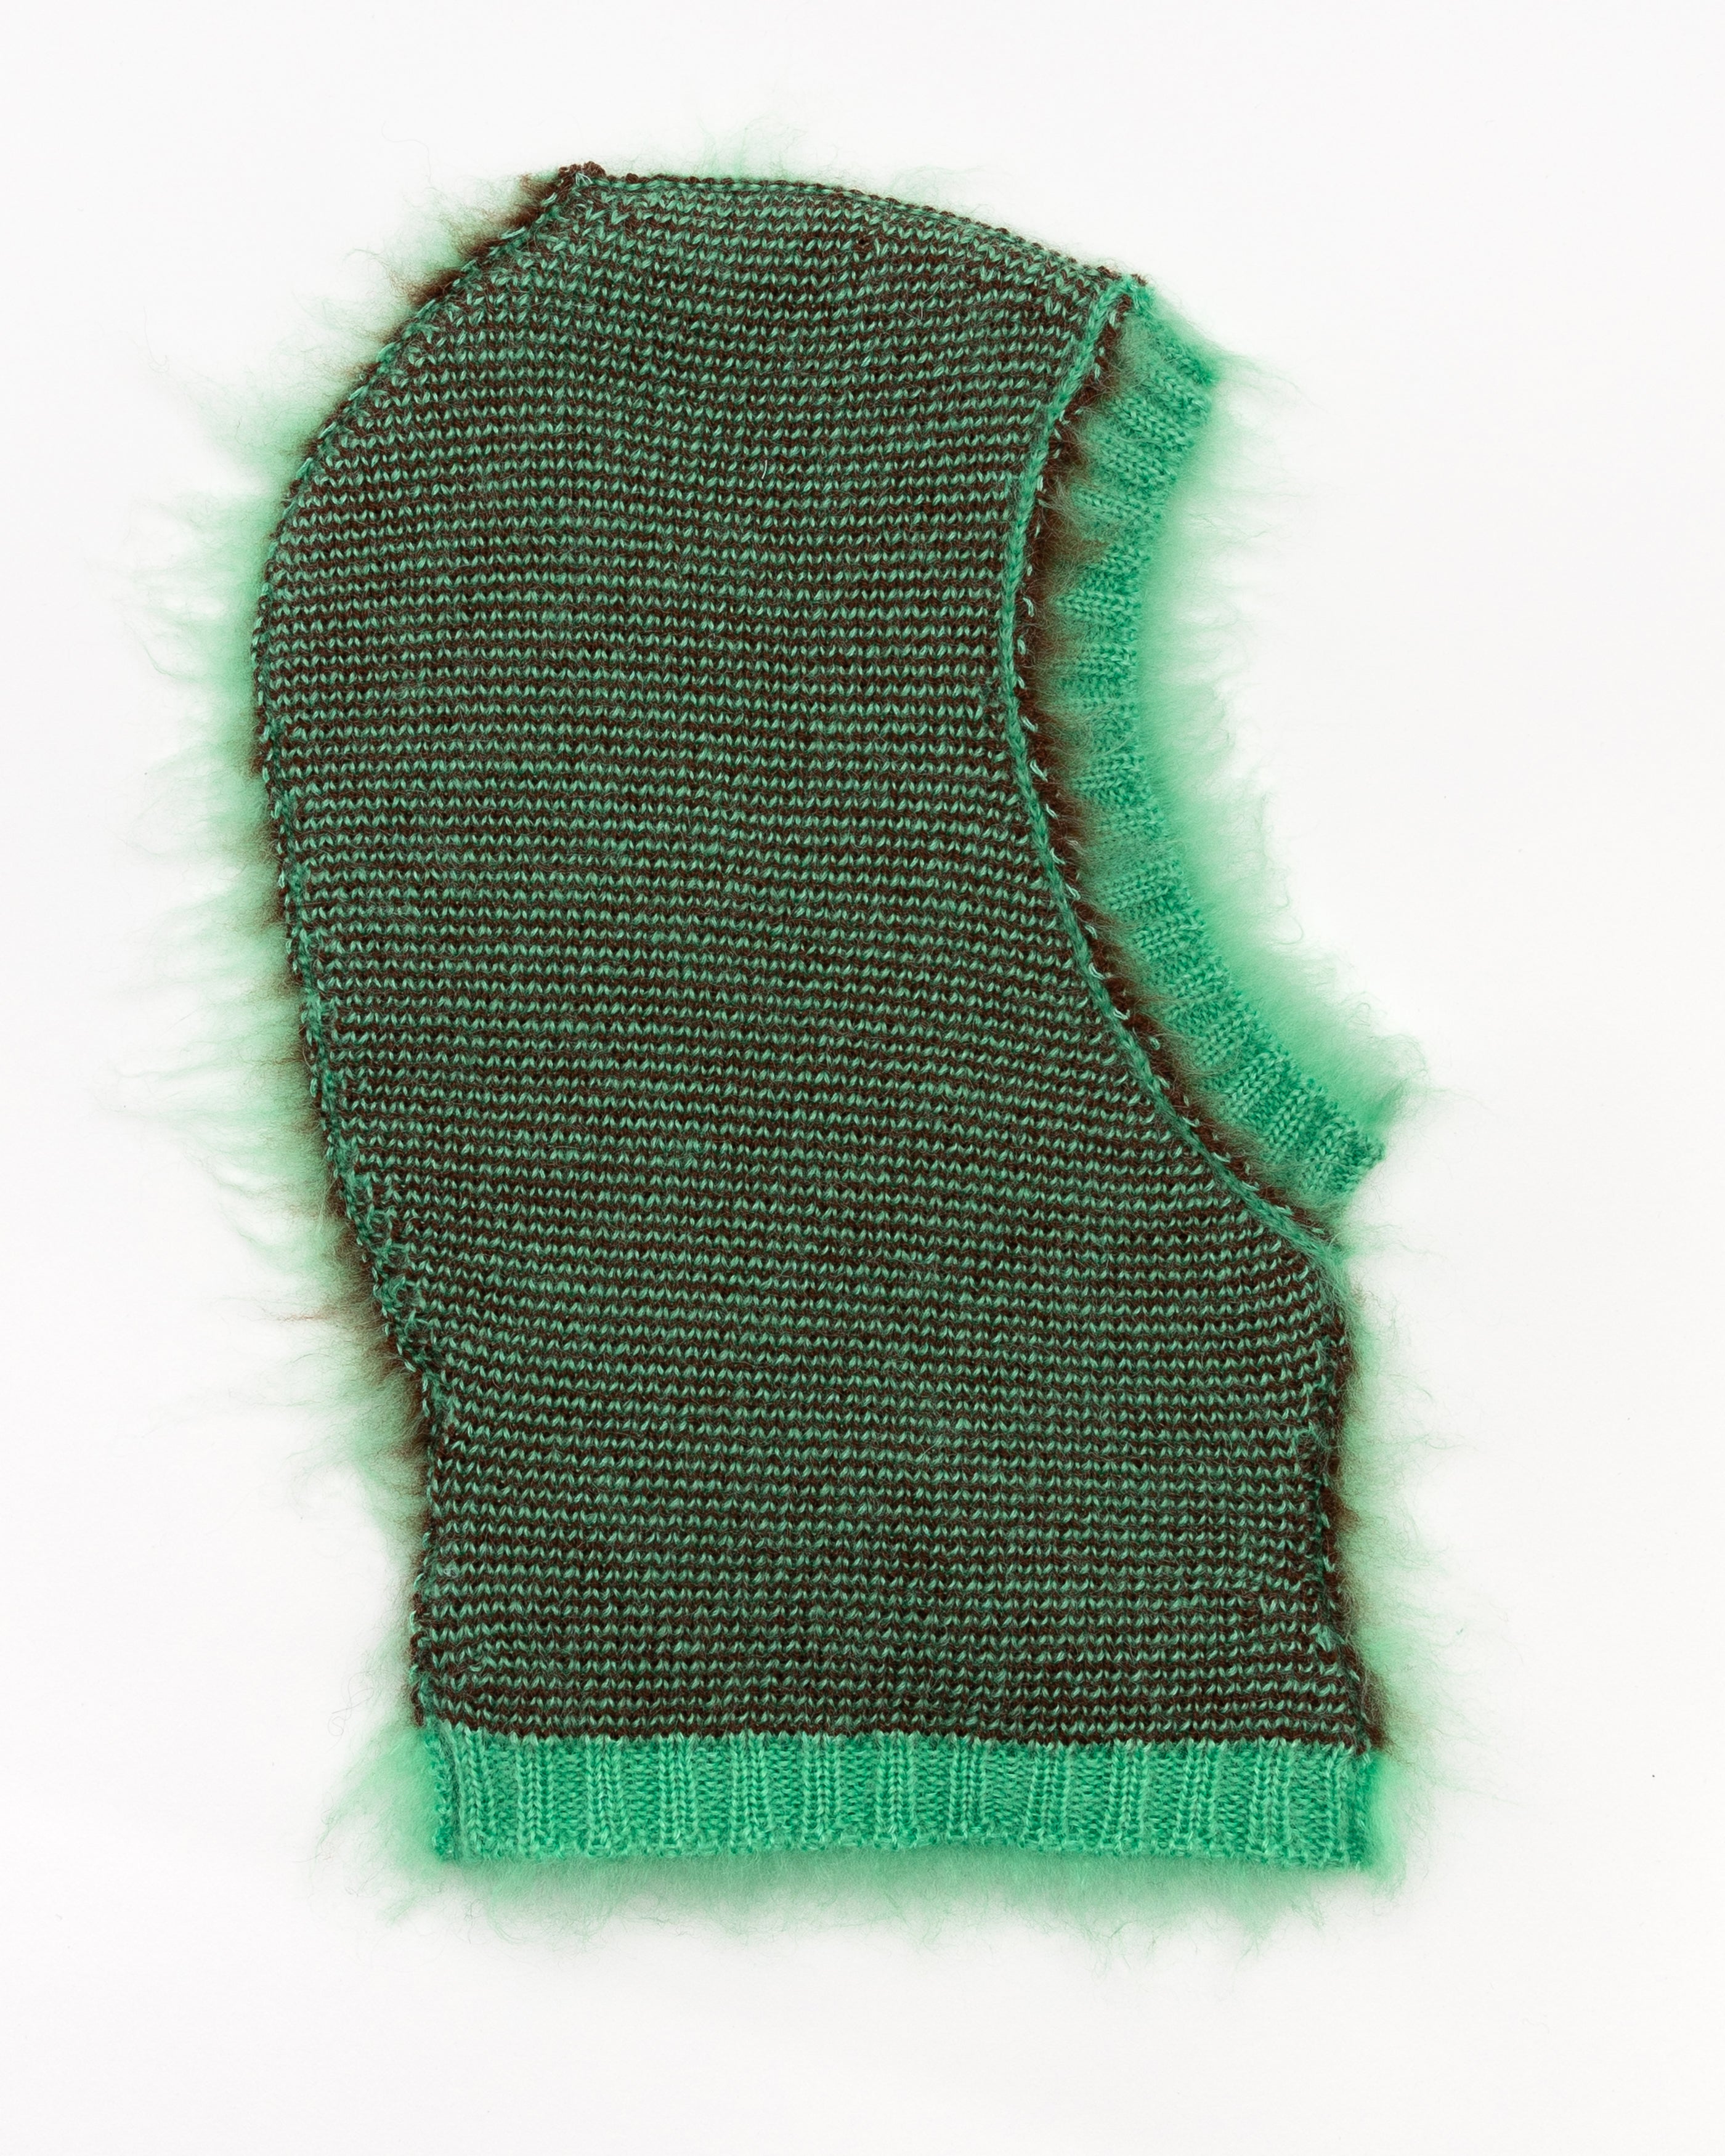 Brushed Mohair Mask in Brown and Mint